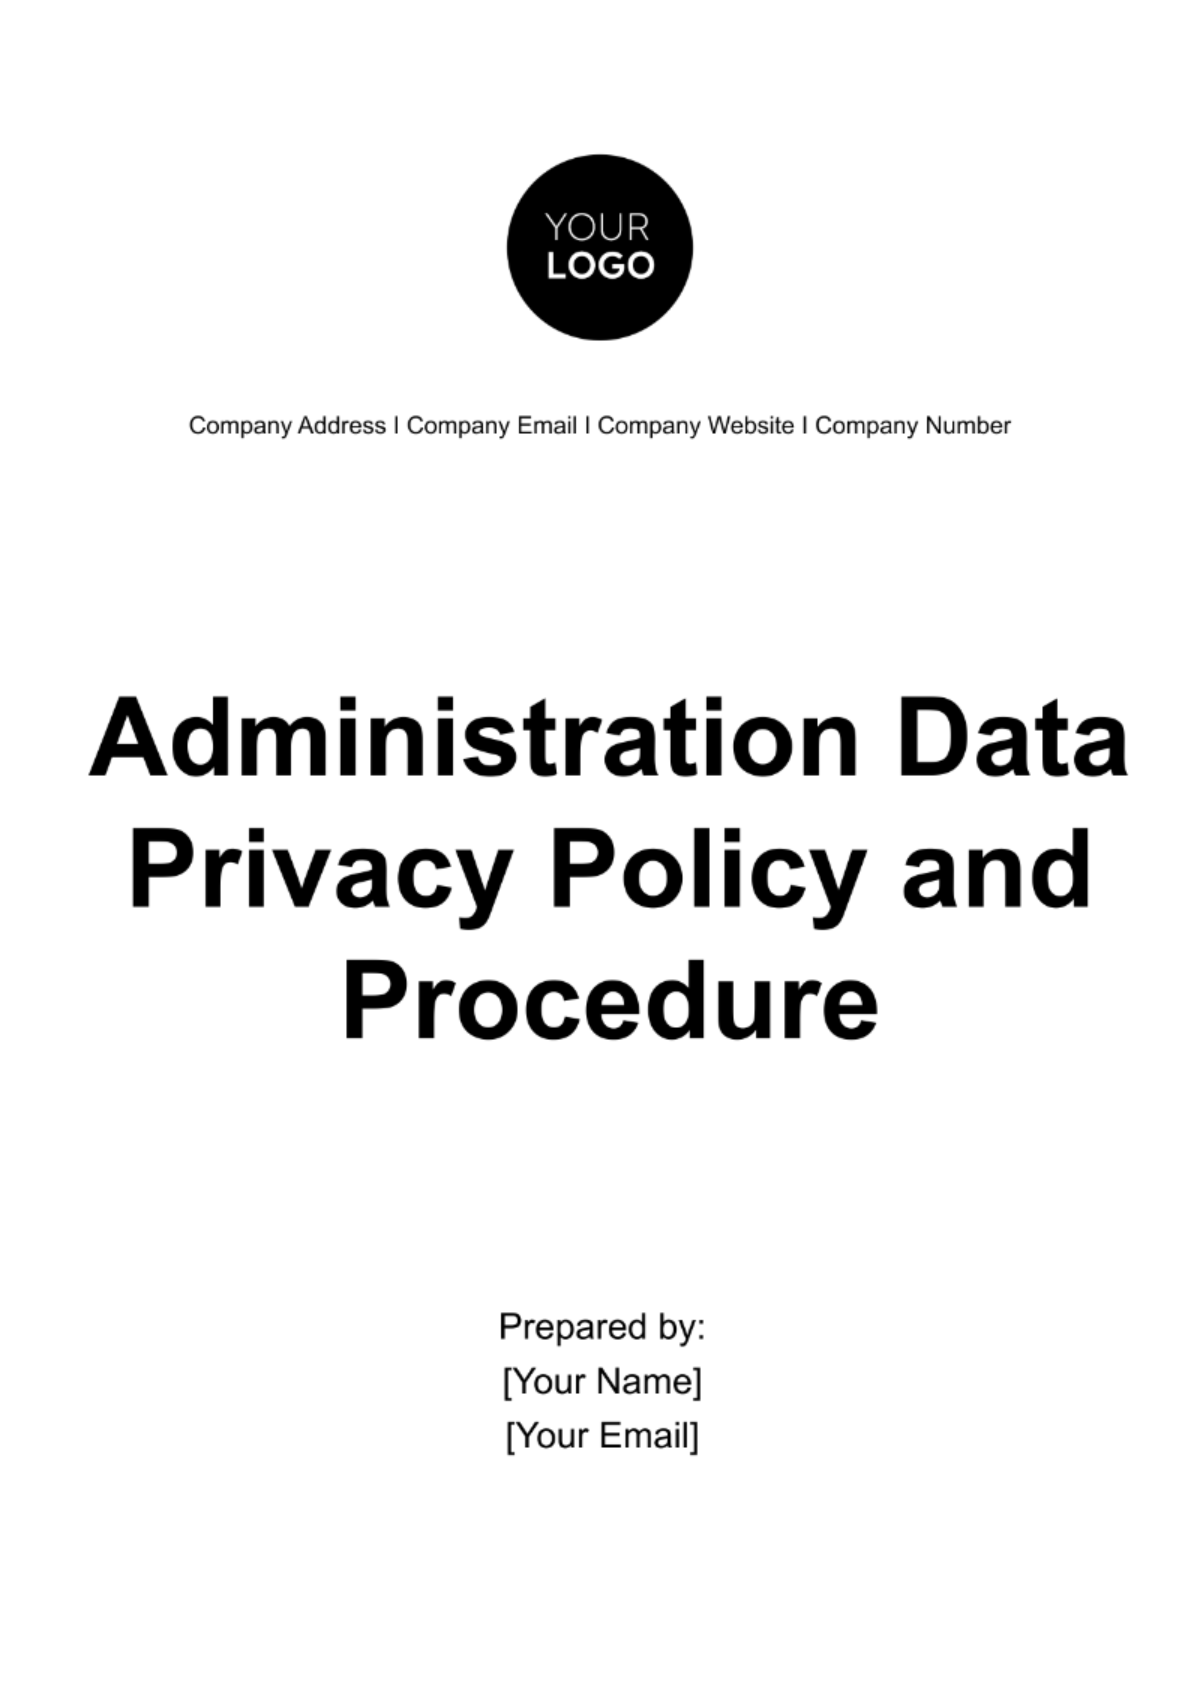 Free Administration Data Privacy Policy and Procedure Template